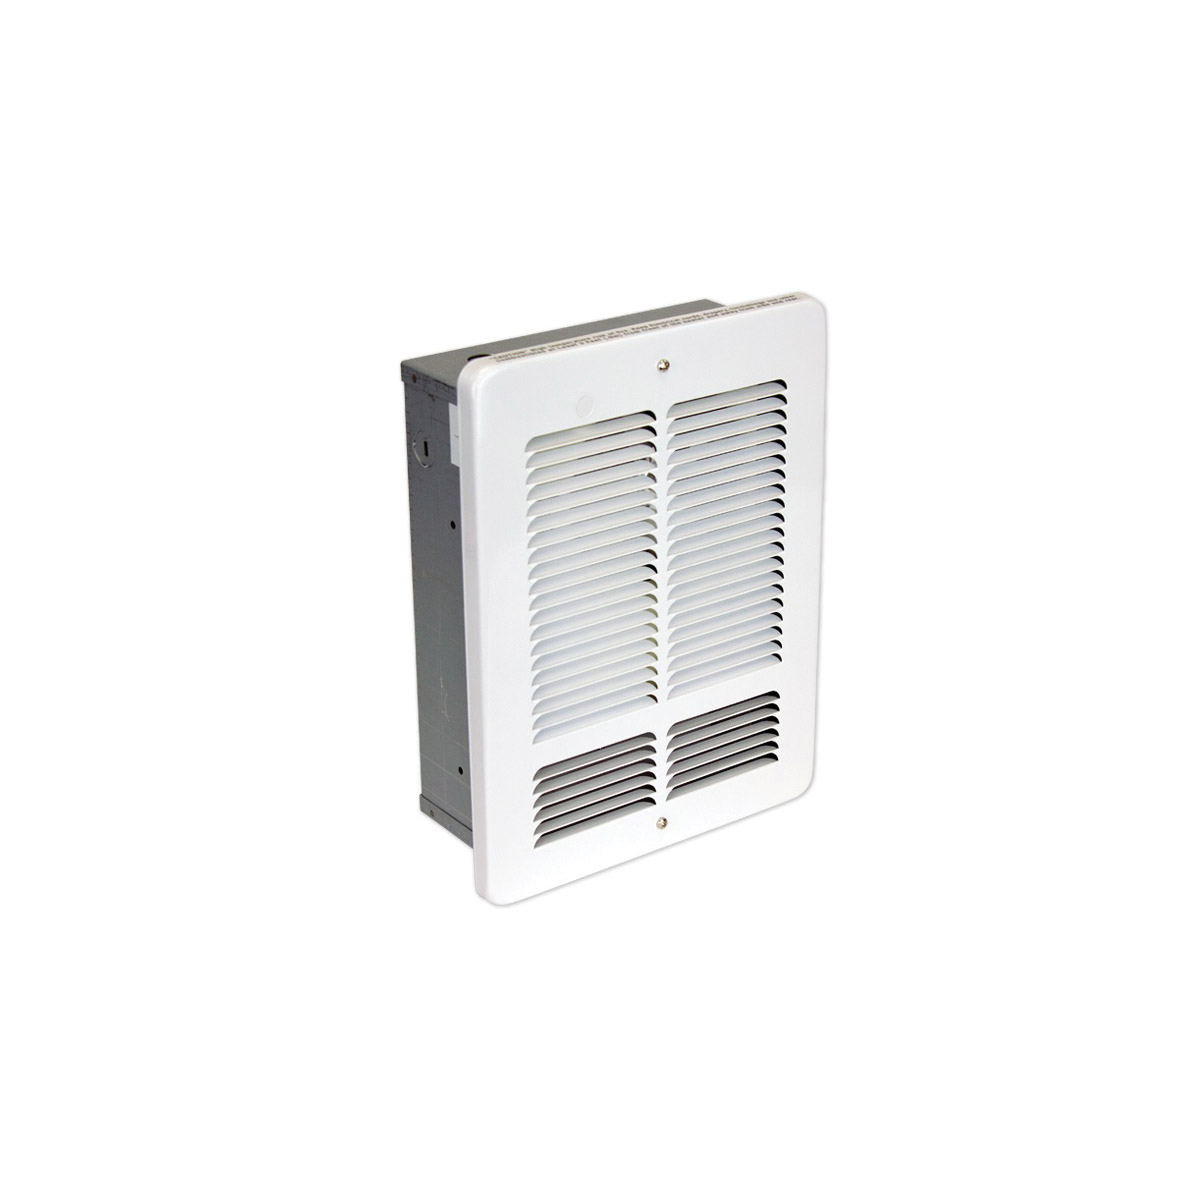 King W Series W1215-W Wall Heater, 6.3/12.5 A, 120 V, 750/1500 W, 5118 Btu/hr BTU, 400 sq-ft Heating Area, White - 1